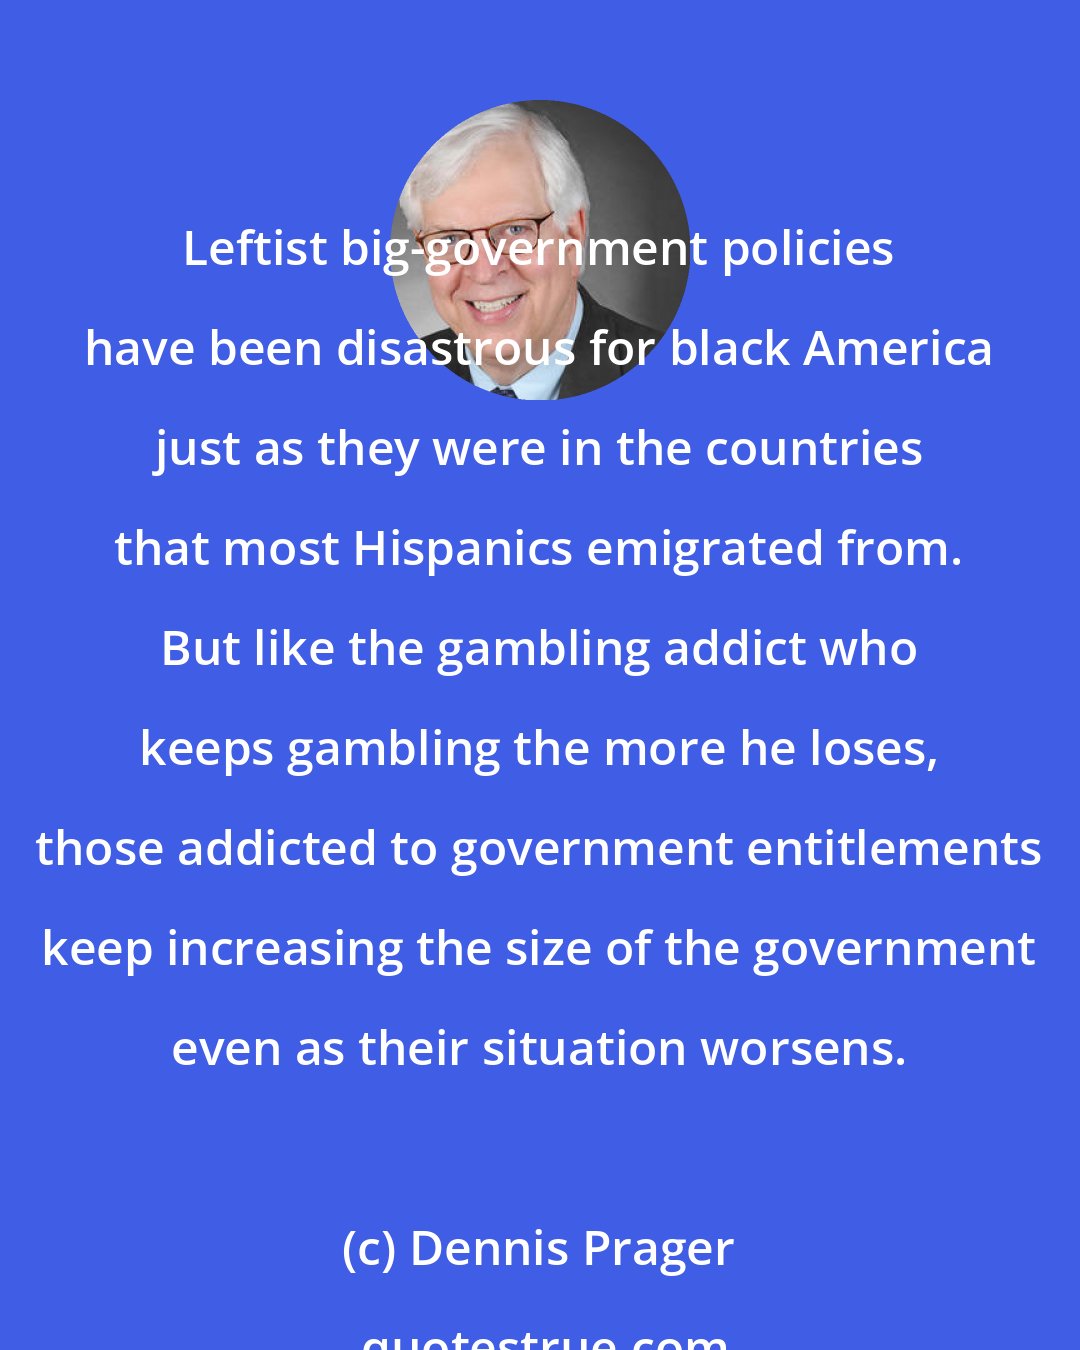 Dennis Prager: Leftist big-government policies have been disastrous for black America just as they were in the countries that most Hispanics emigrated from. But like the gambling addict who keeps gambling the more he loses, those addicted to government entitlements keep increasing the size of the government even as their situation worsens.